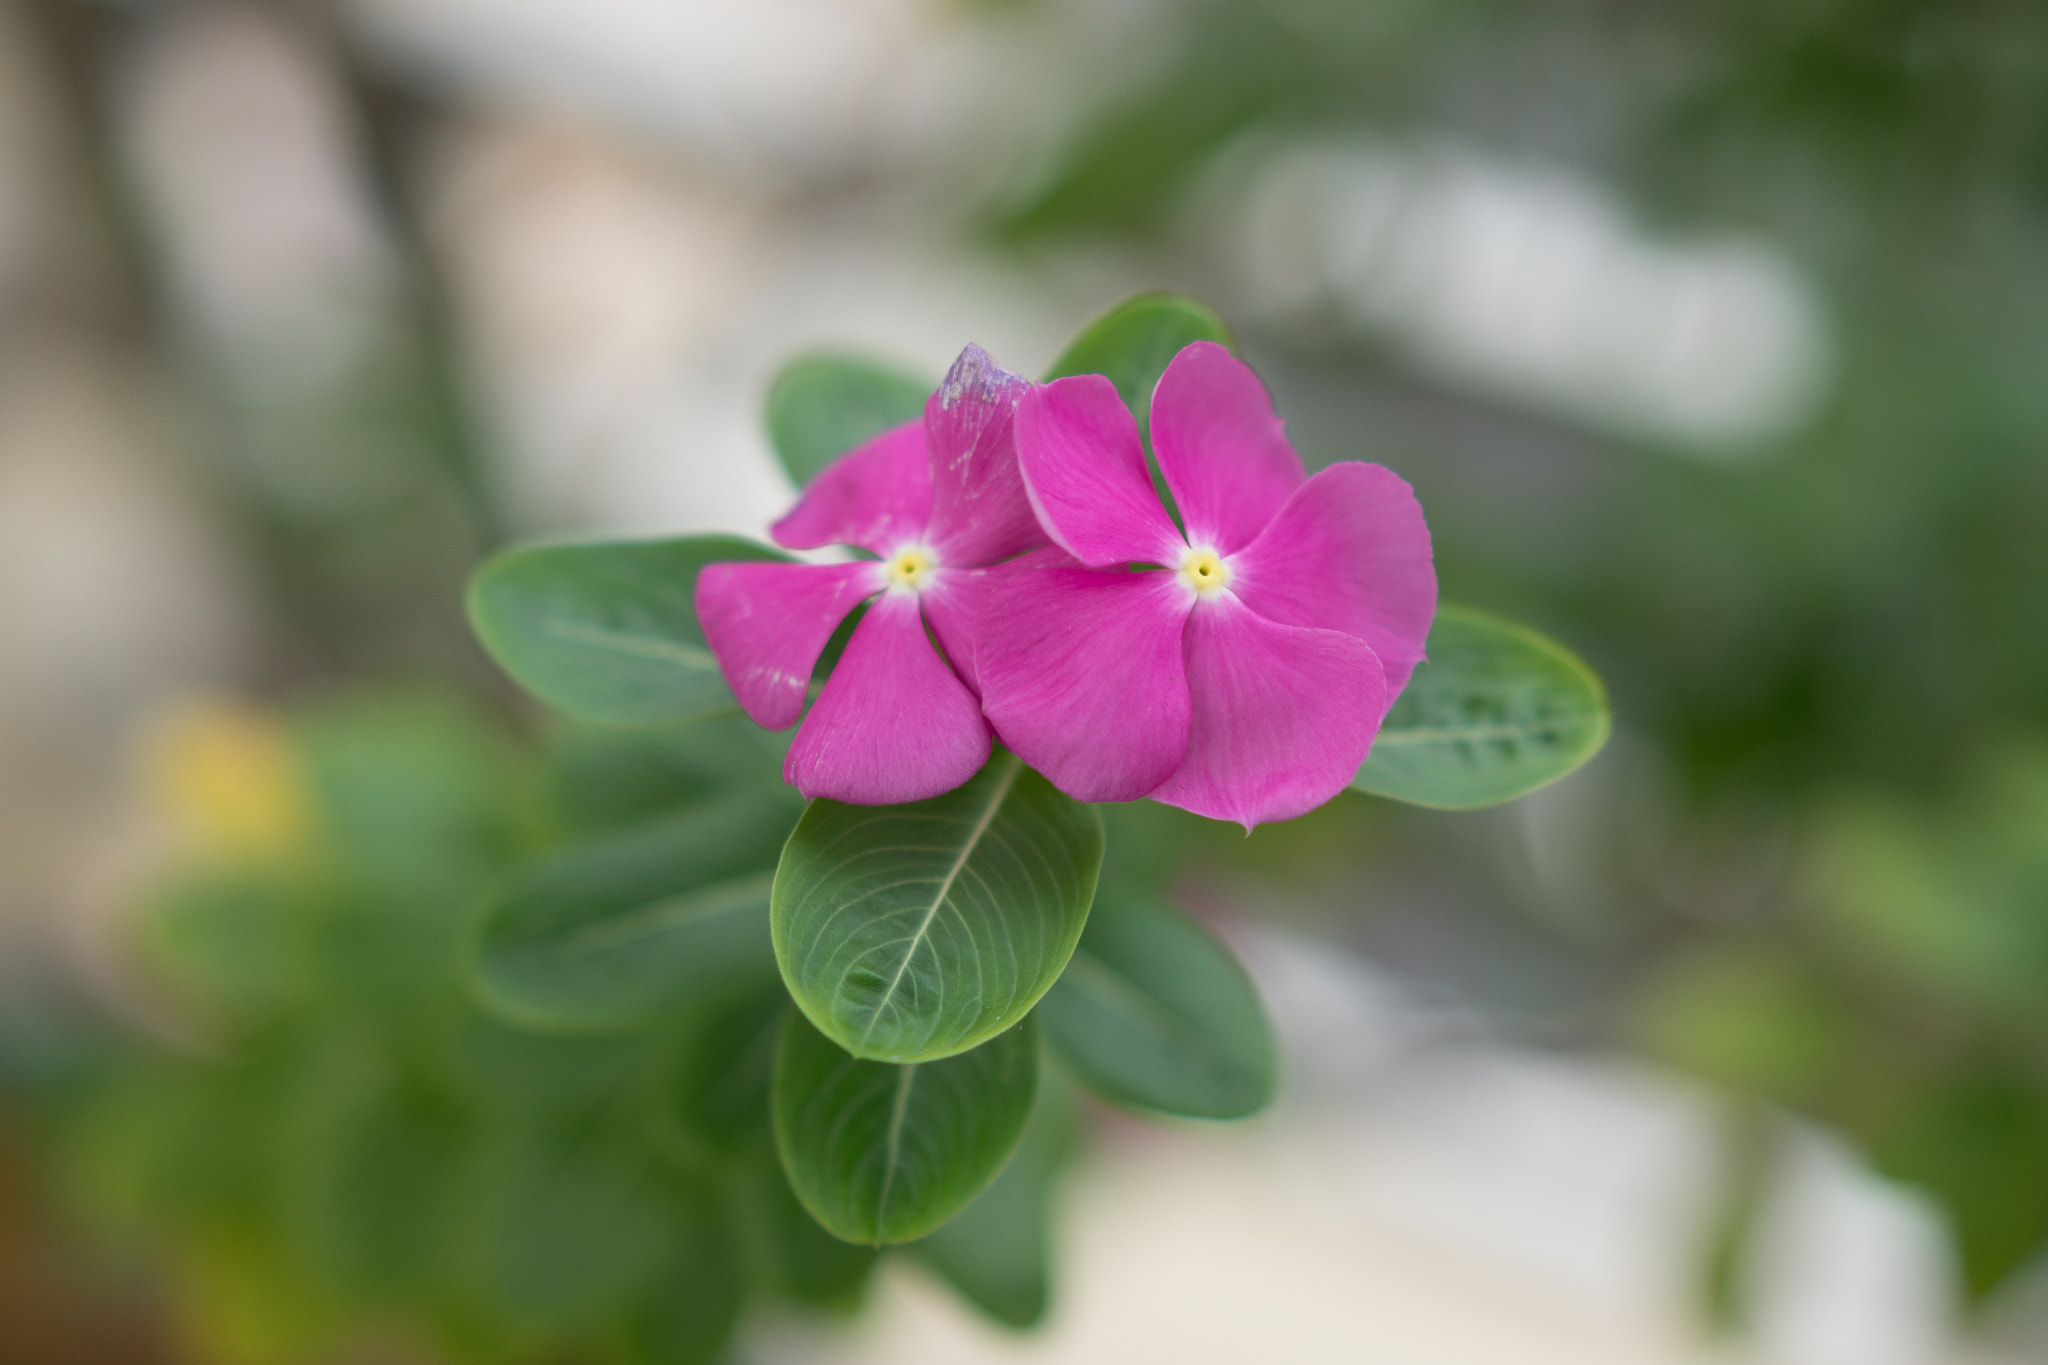 Sony a6500 sample photo. Small flower in lunar new year photography